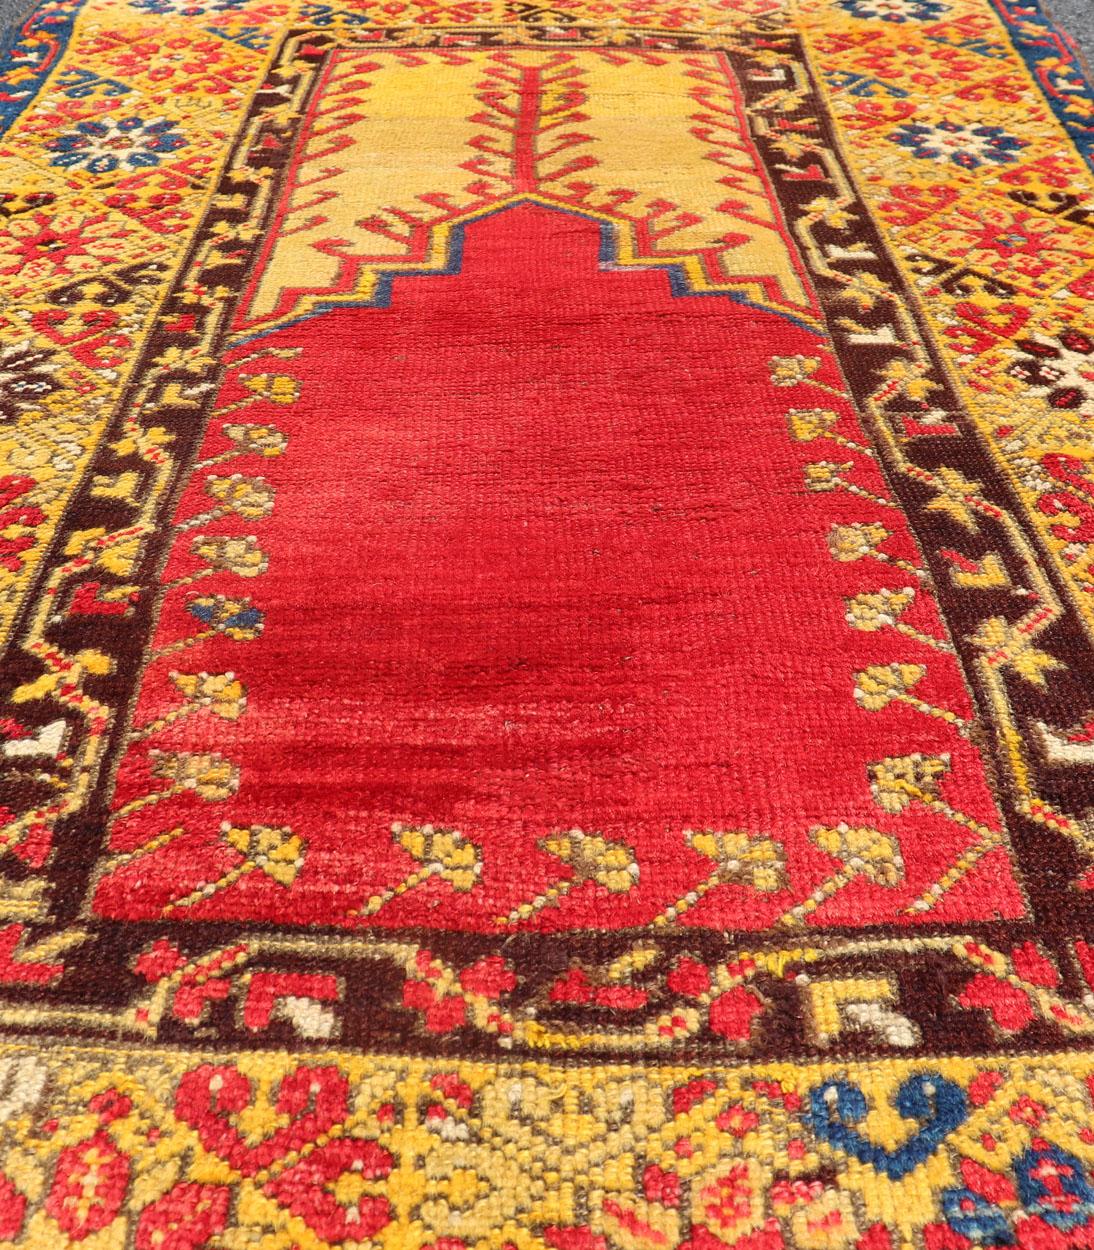 Wool Antique Turkish Prayer Rug in Vibrant Saffron Yellow, Gold, Red and Blue For Sale